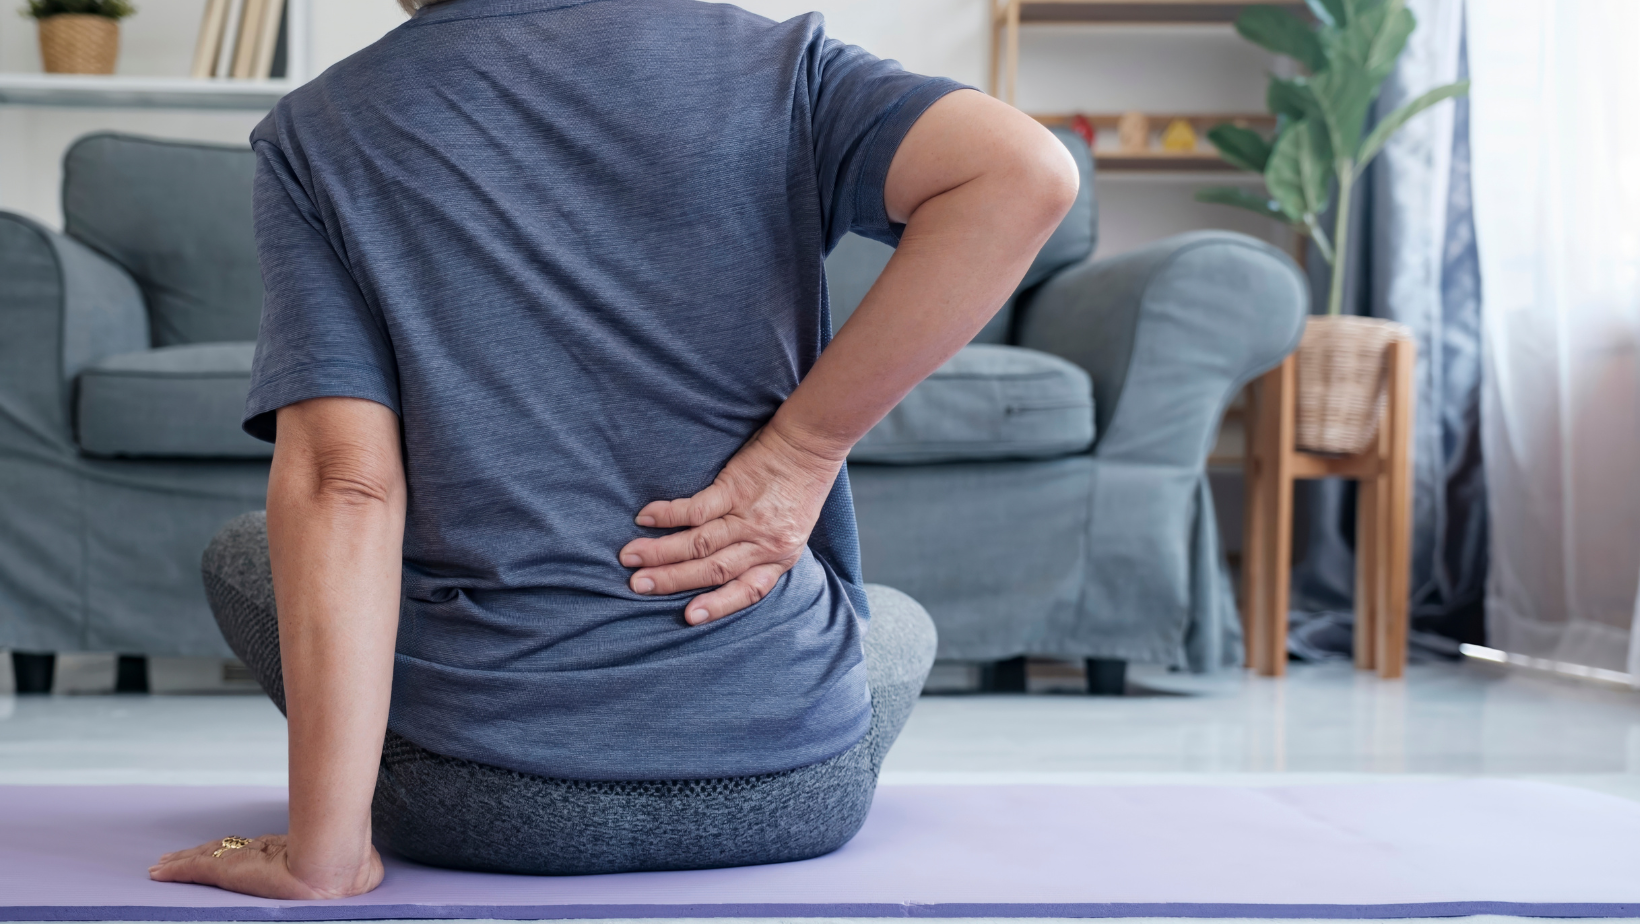 New WHO guidelines on chronic low back pain